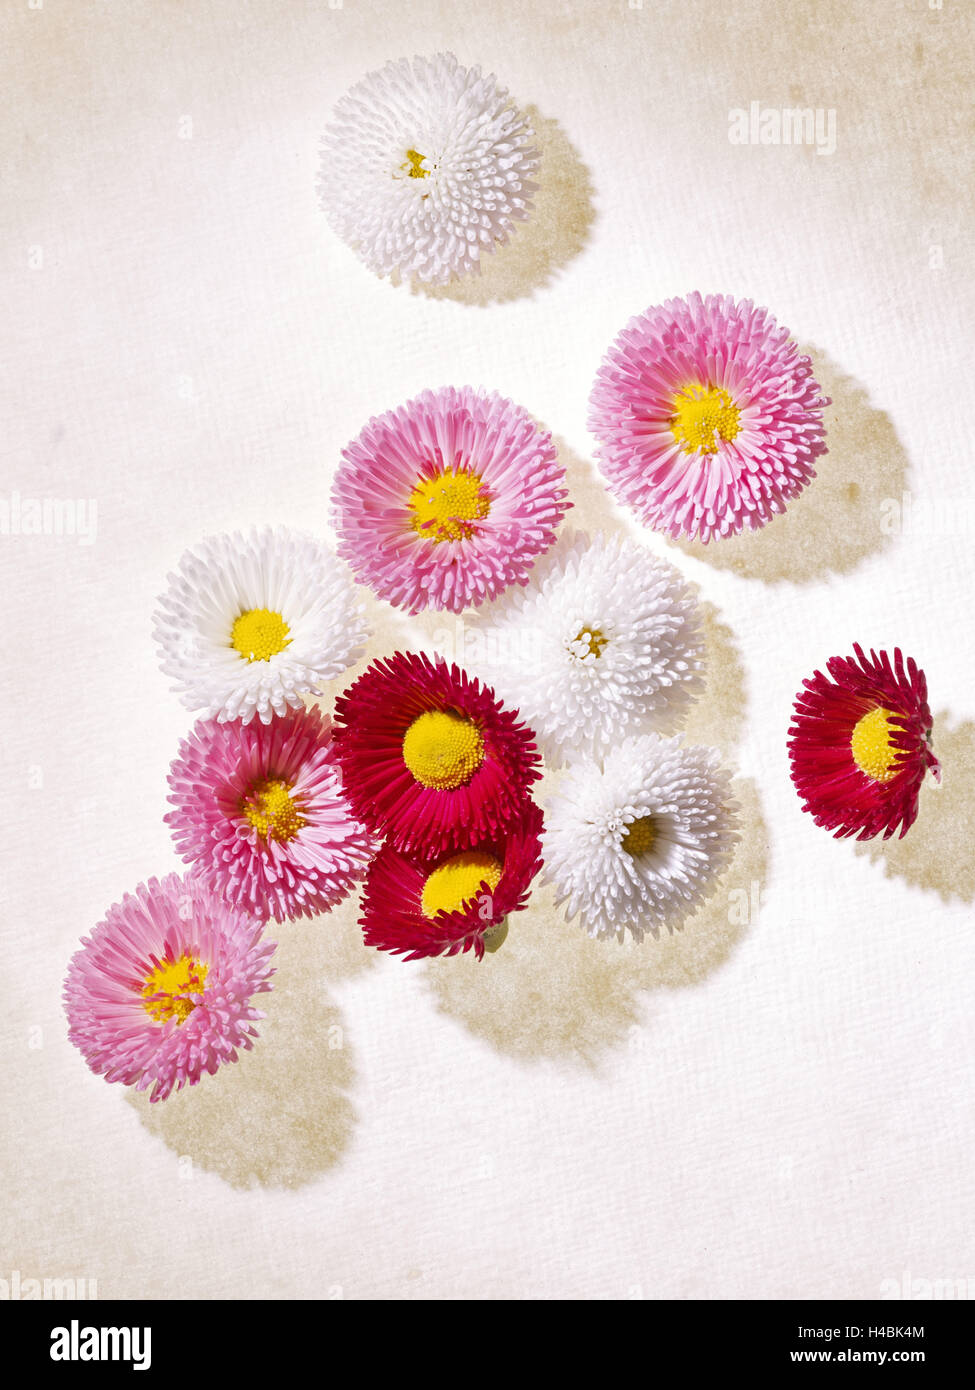 Daisy, Bellis perennis, blossoms, pink, white, red, Stock Photo